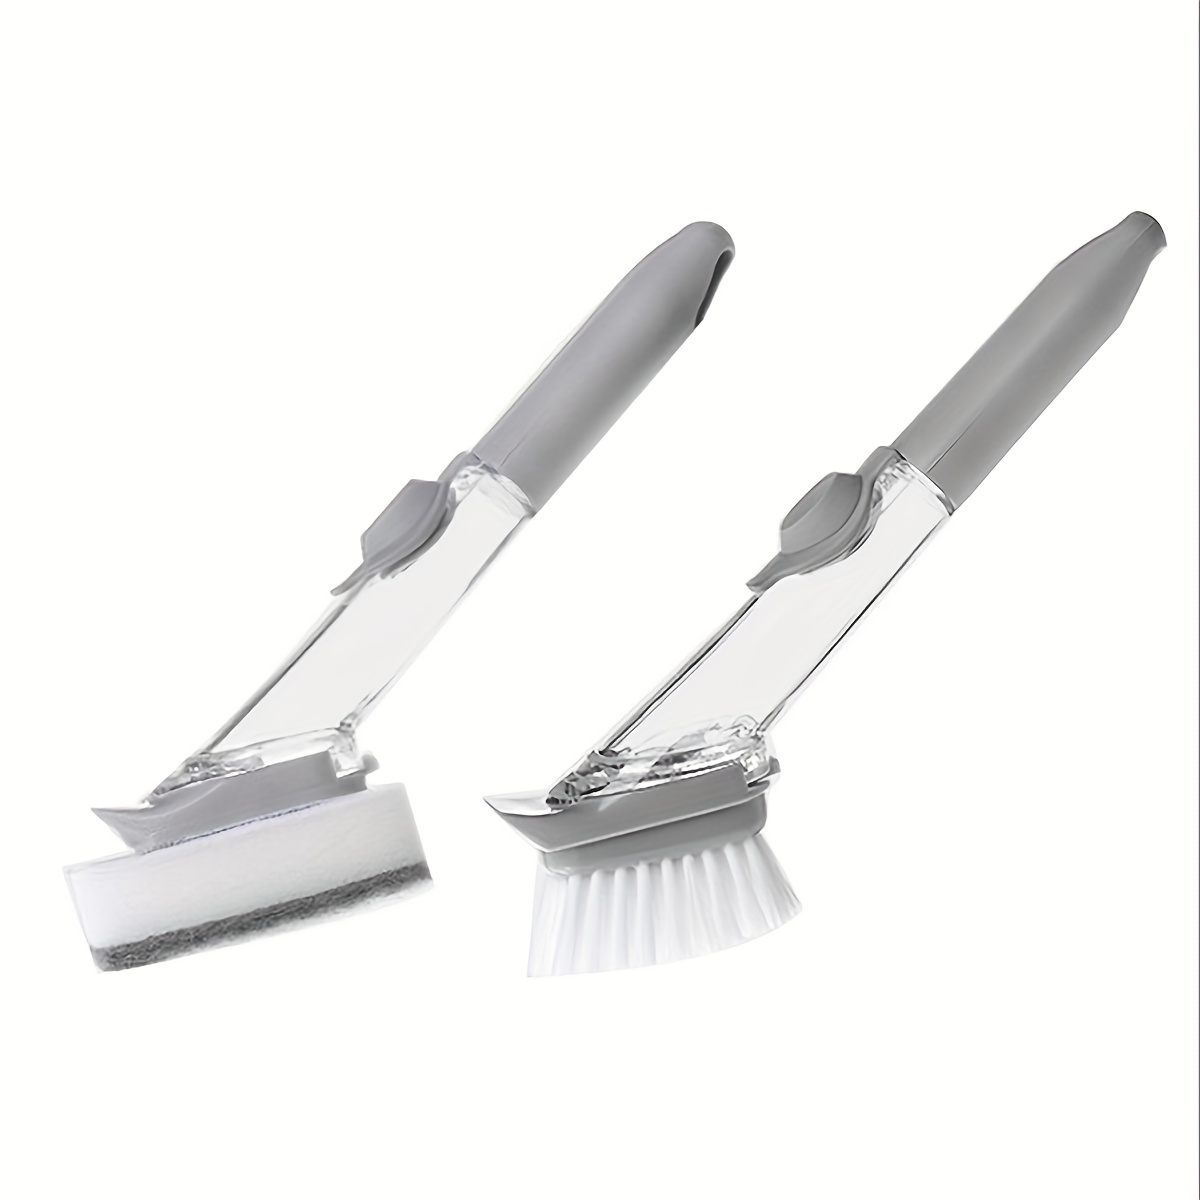 Multifunctional Hydraulic Cleaning Brushes, Soap Dispensing Dish